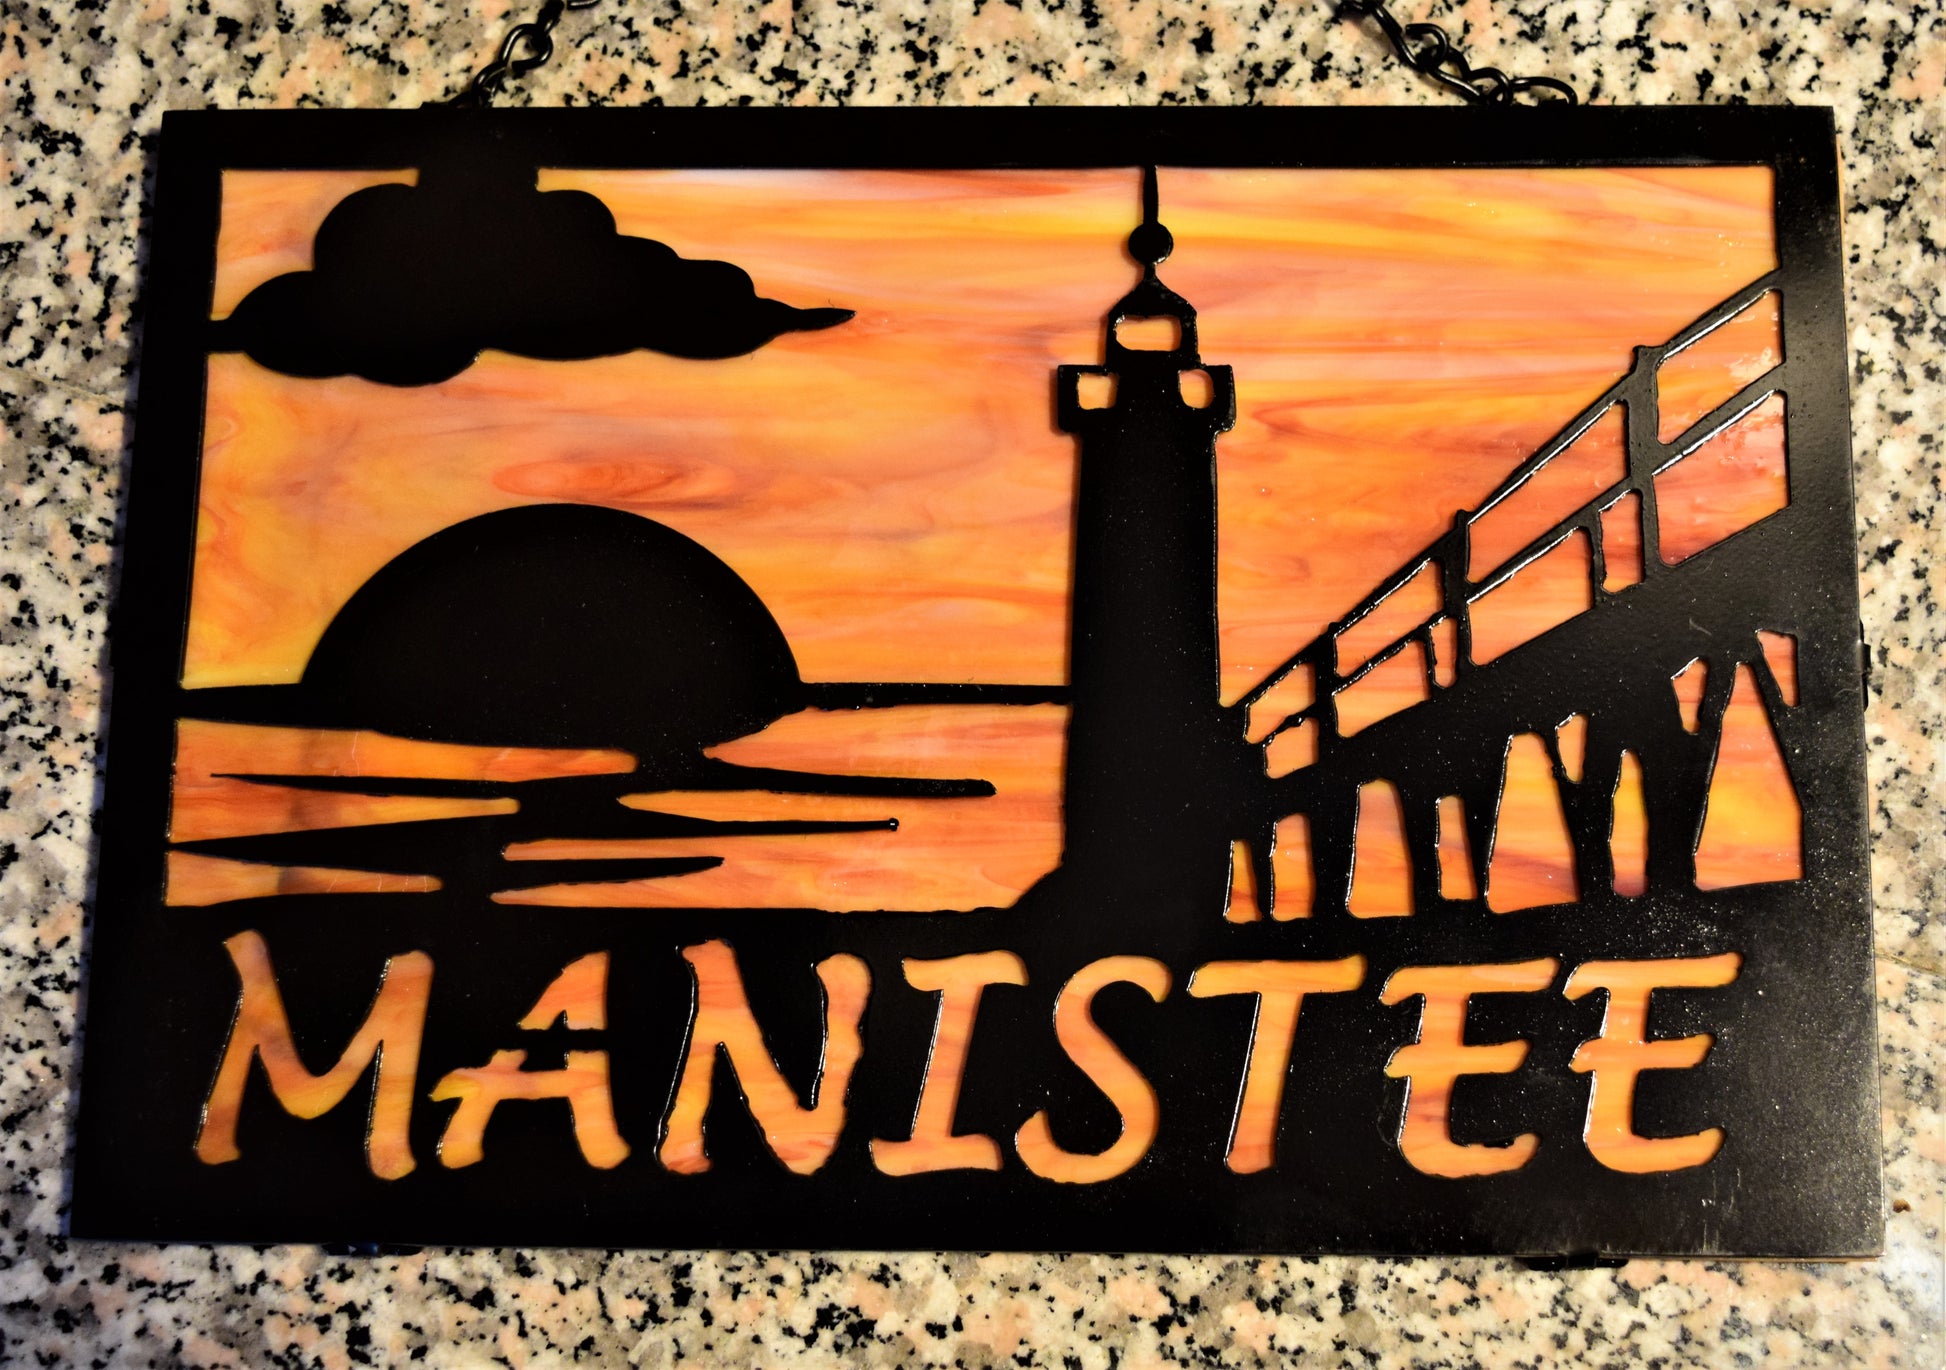 Black custom metal featuring Manistee Michigan lighthouse with cloud and sunset. Manistee spelled out beneath lighthouse image. With Orange and yellow behind metal. 